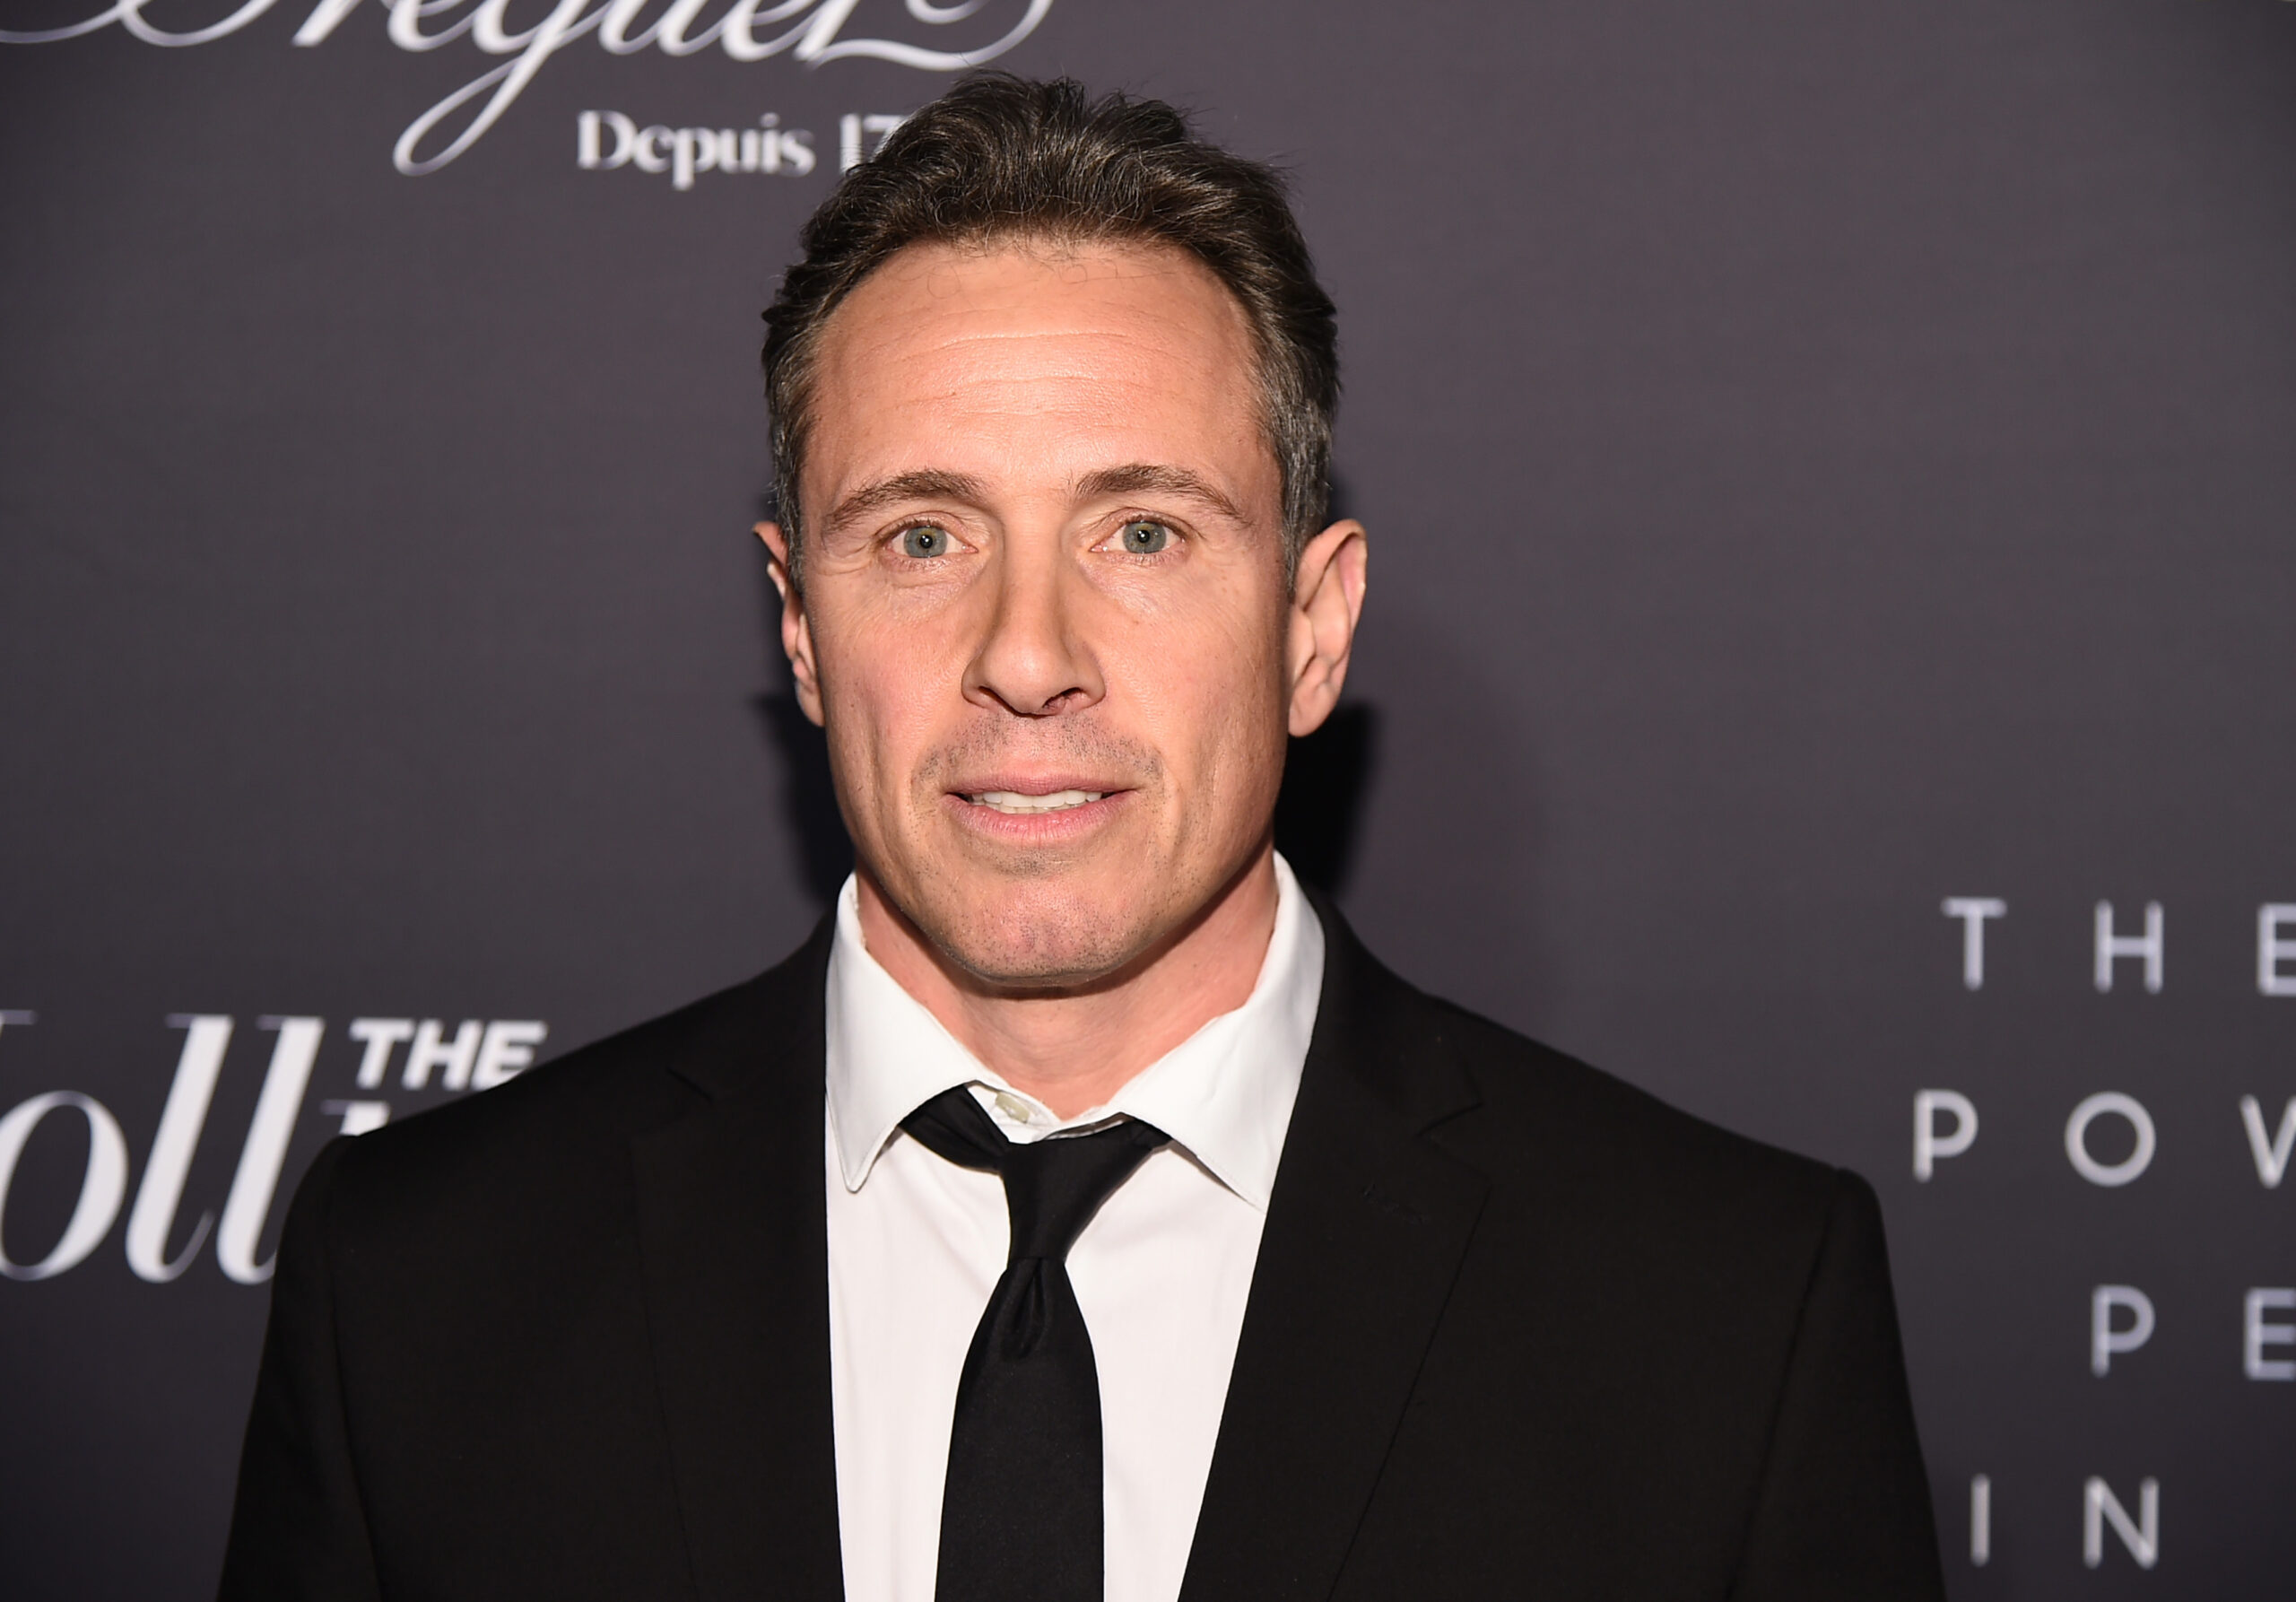 Report: Chris Cuomo Plans to Sue CNN for at Least $18 Million If Network Fails to Pay Remainder of Contract